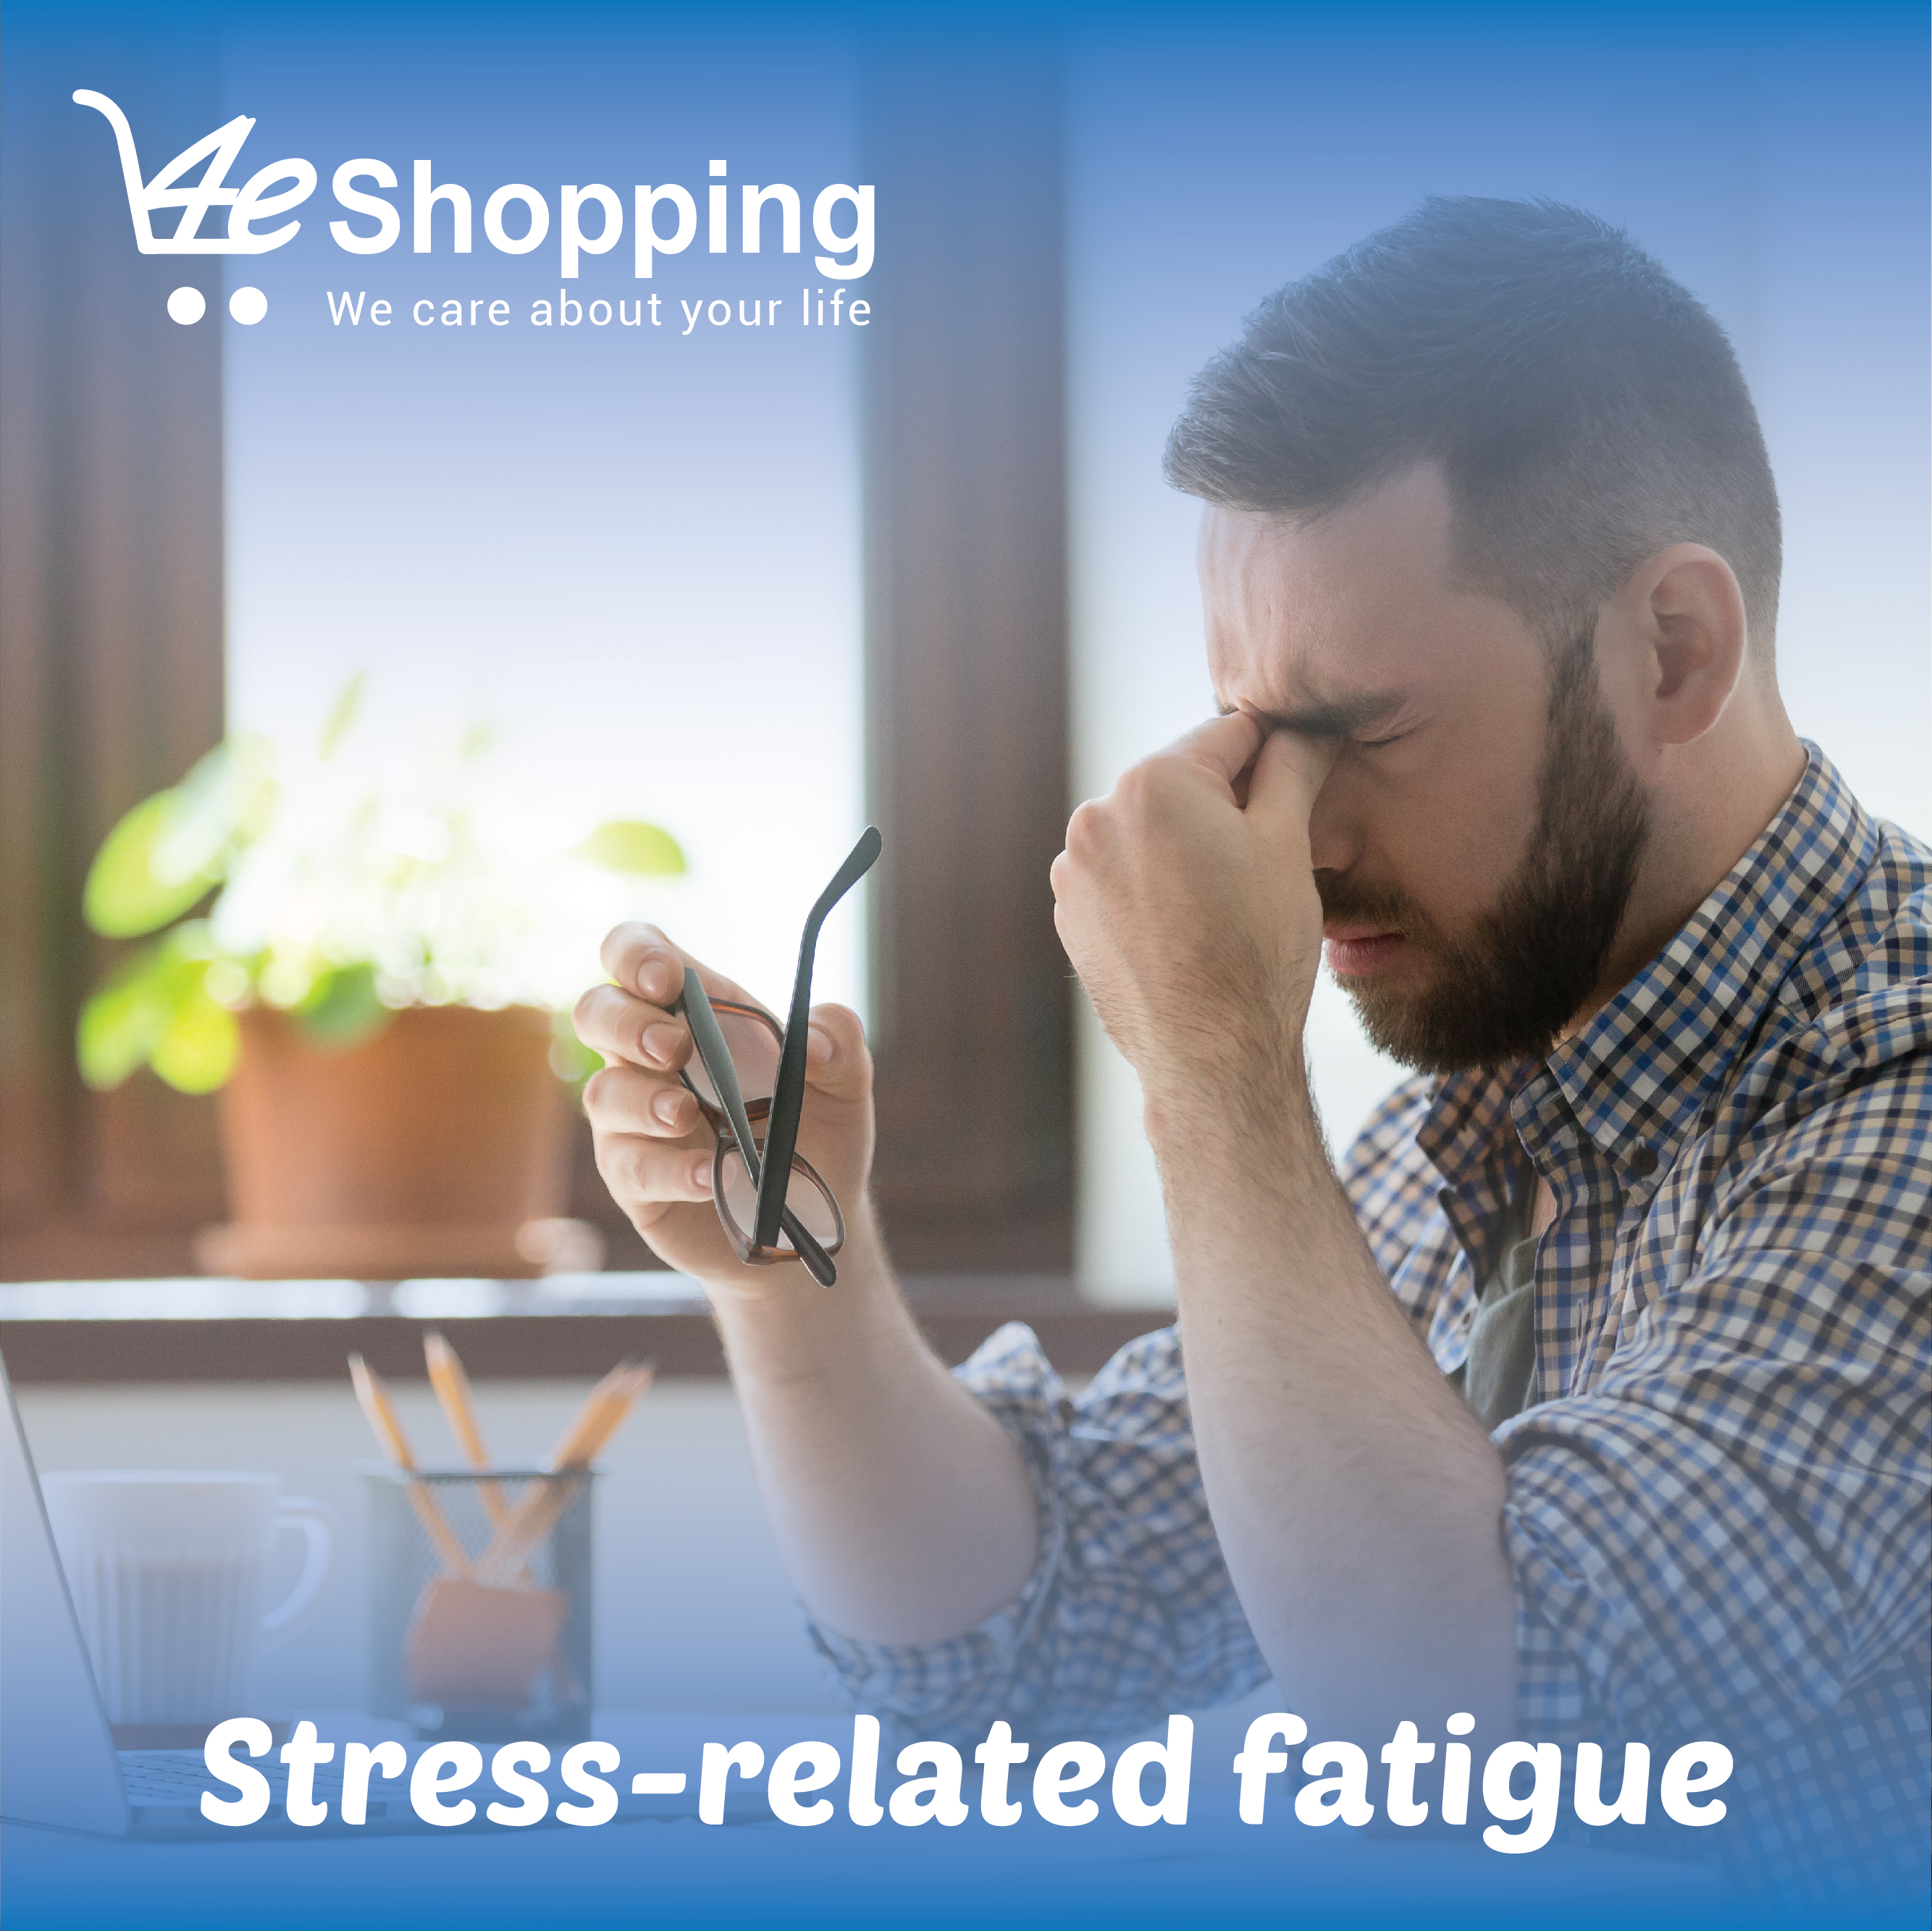 Stress-related fatigue